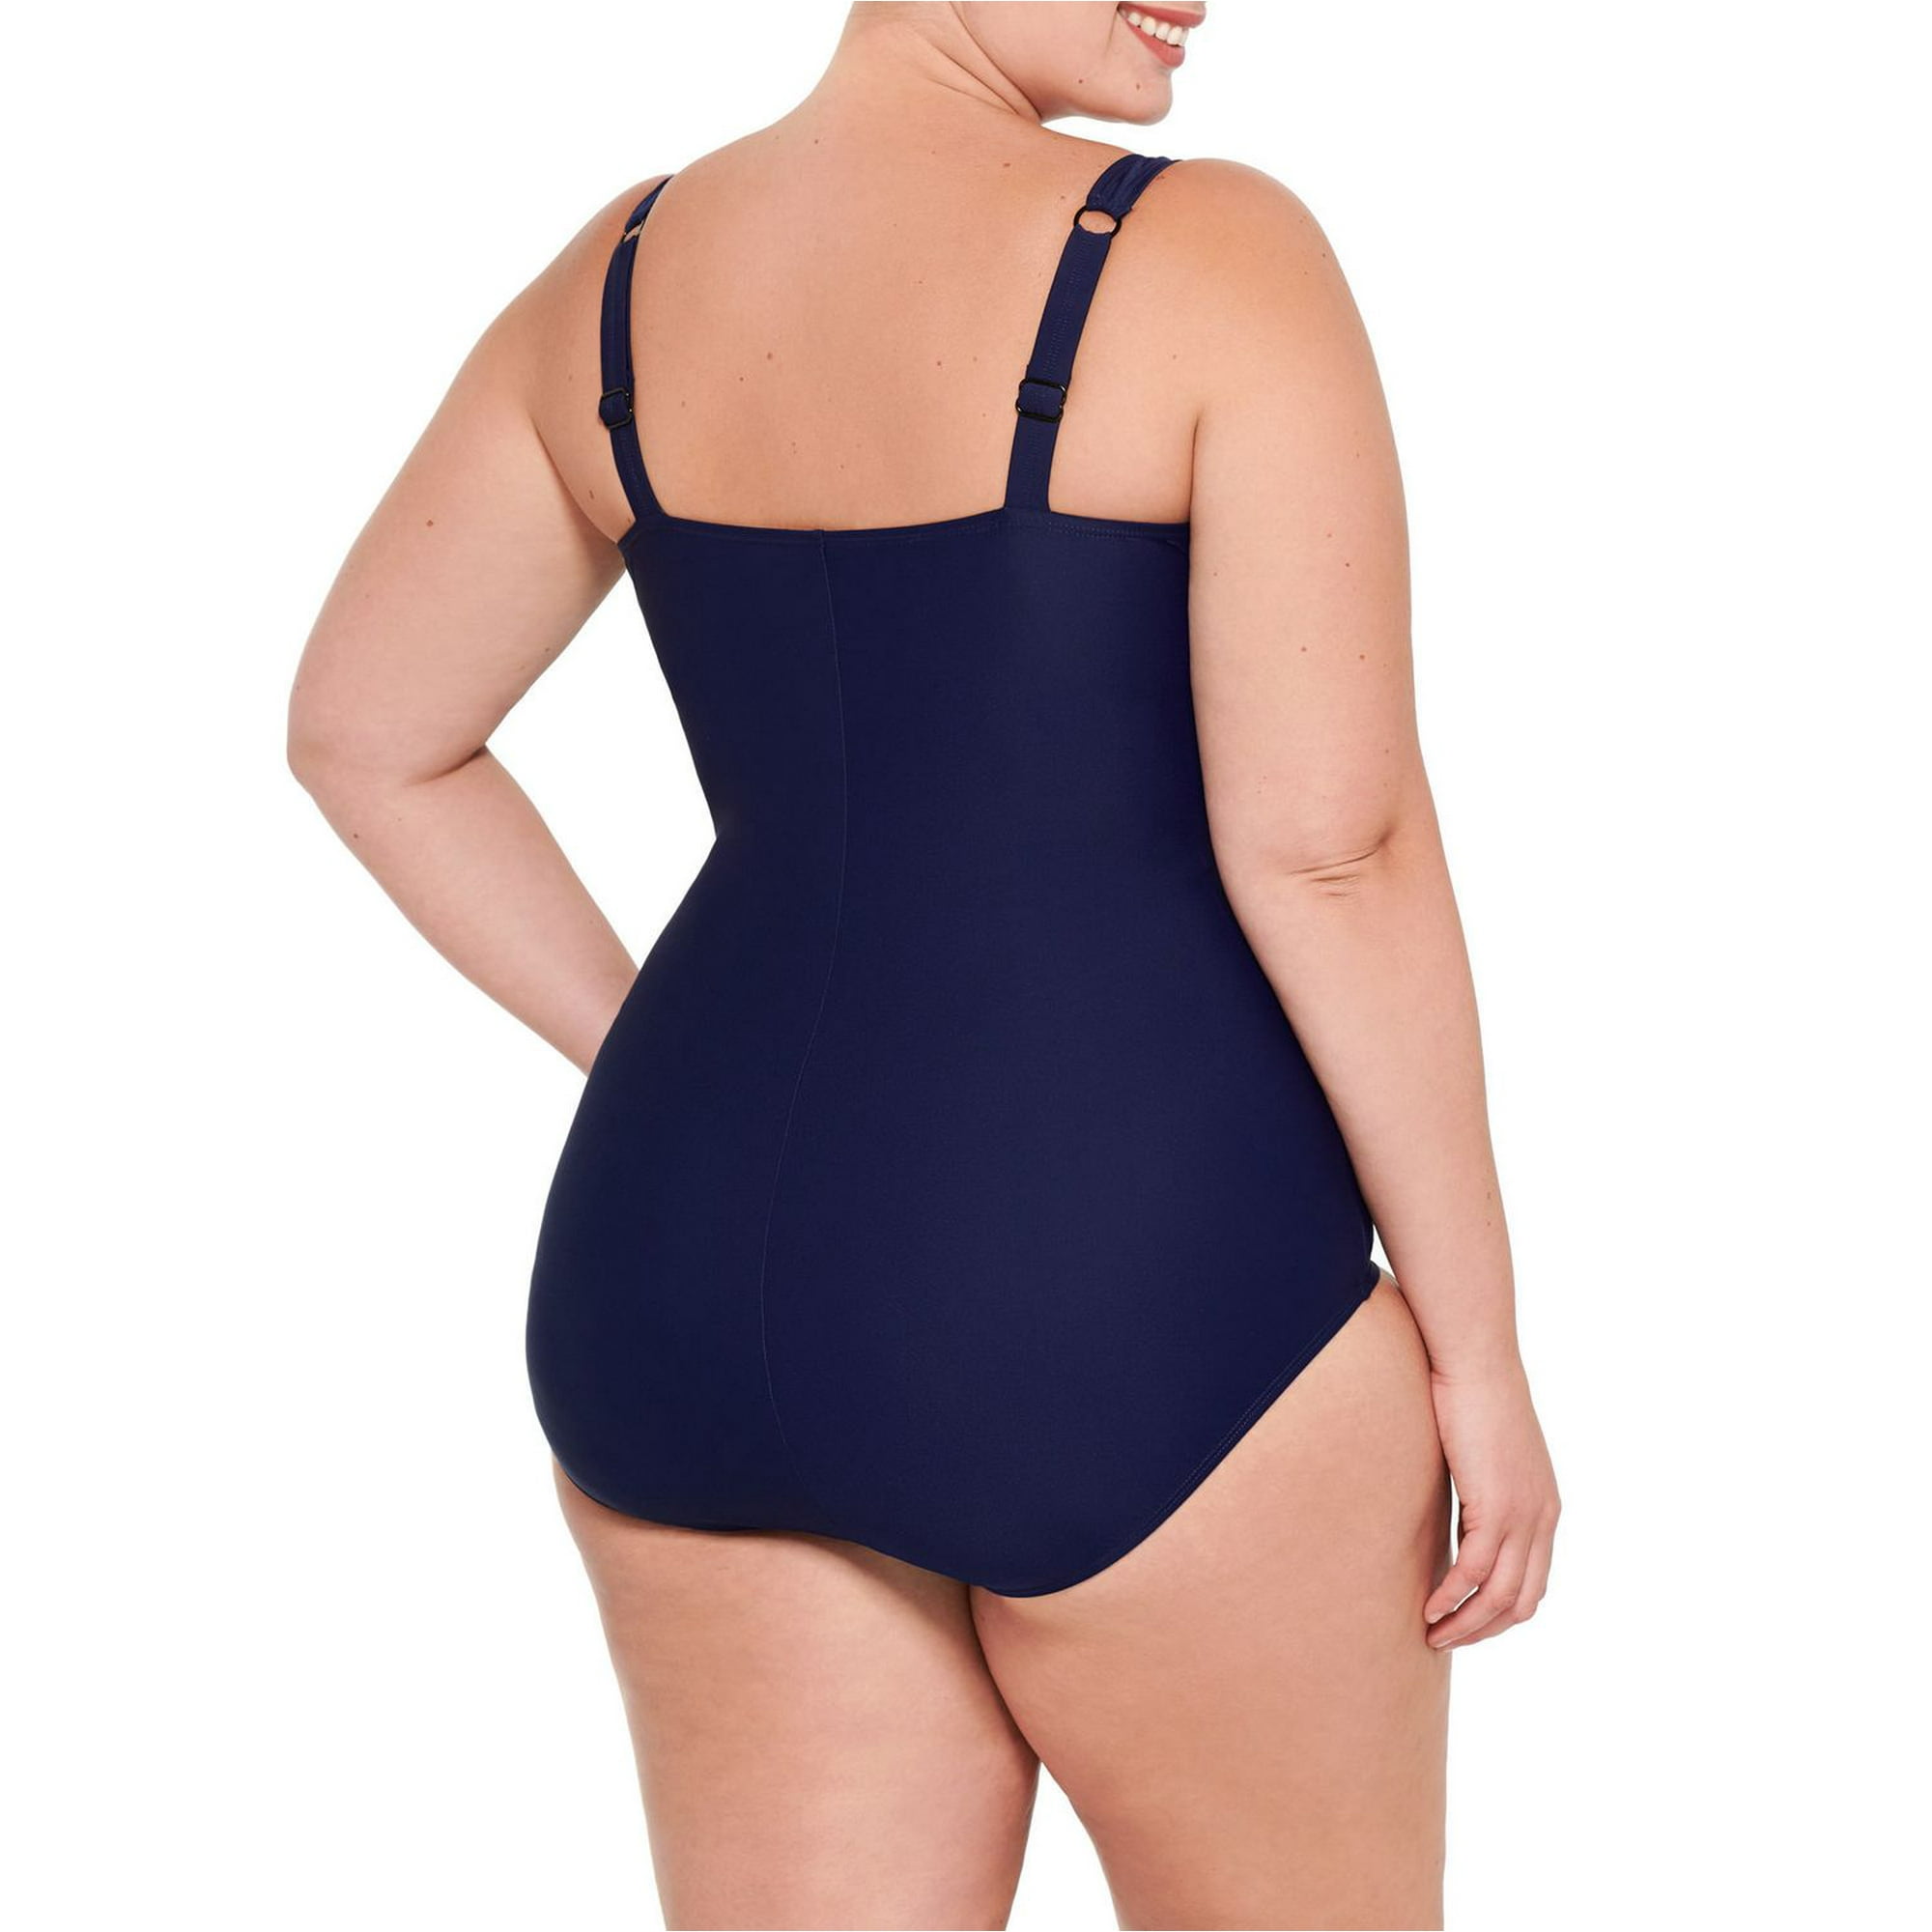 Diva Playsuit This is the Best PLUS SIZE Swimsuit Style in a Boy